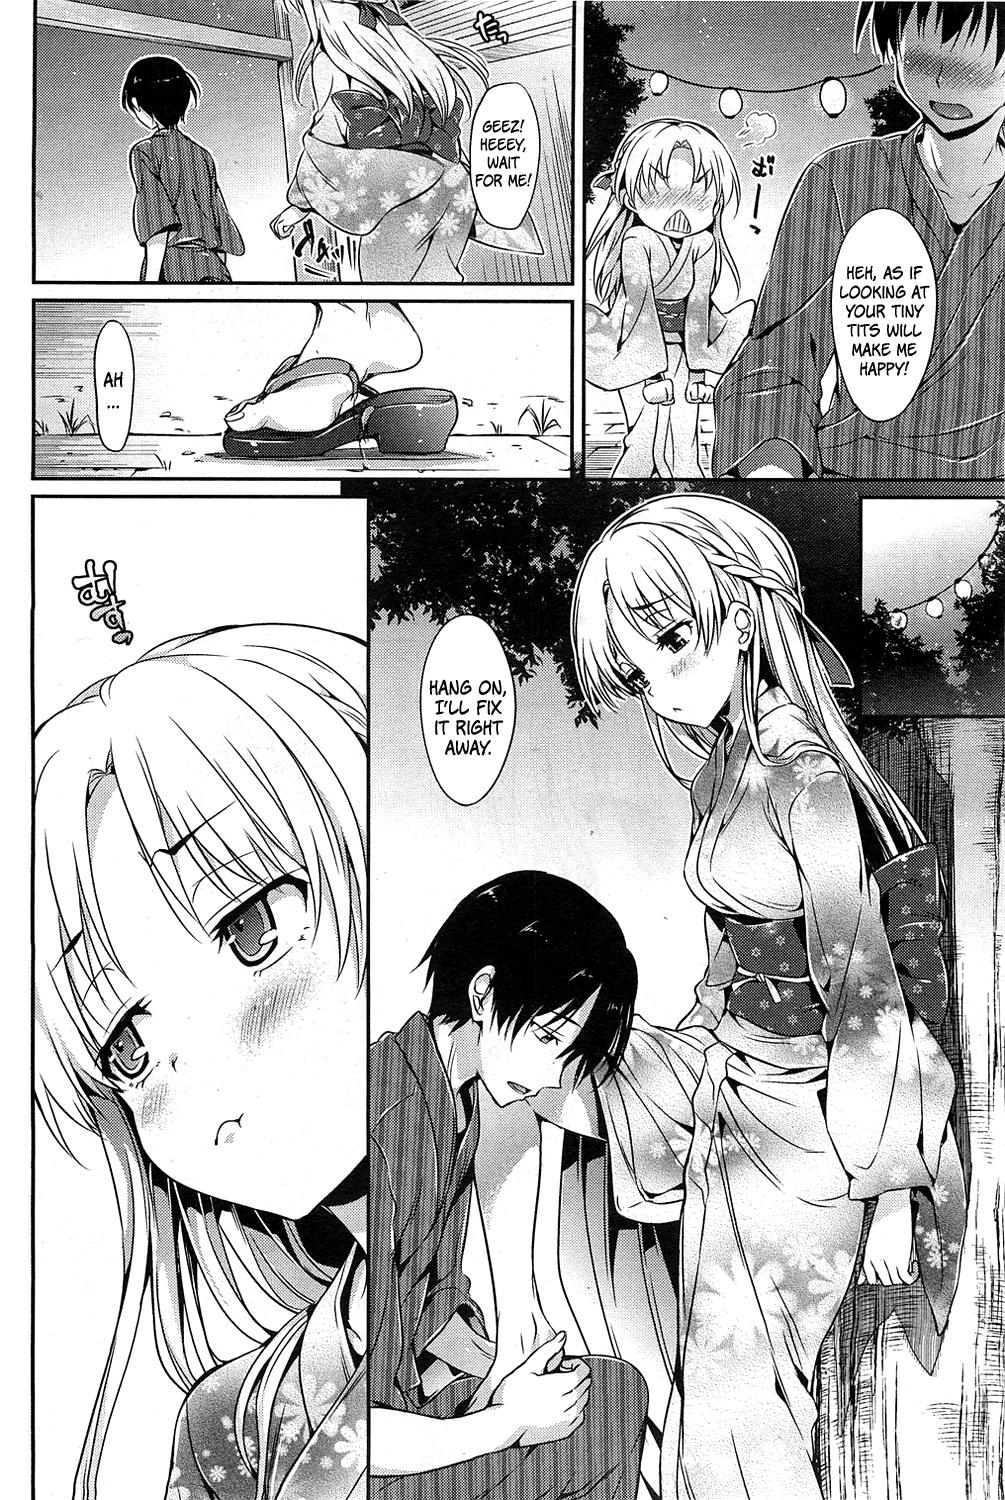 Work Natsumatsuri no Yoru | Night of the Summer Festival Old And Young - Page 4